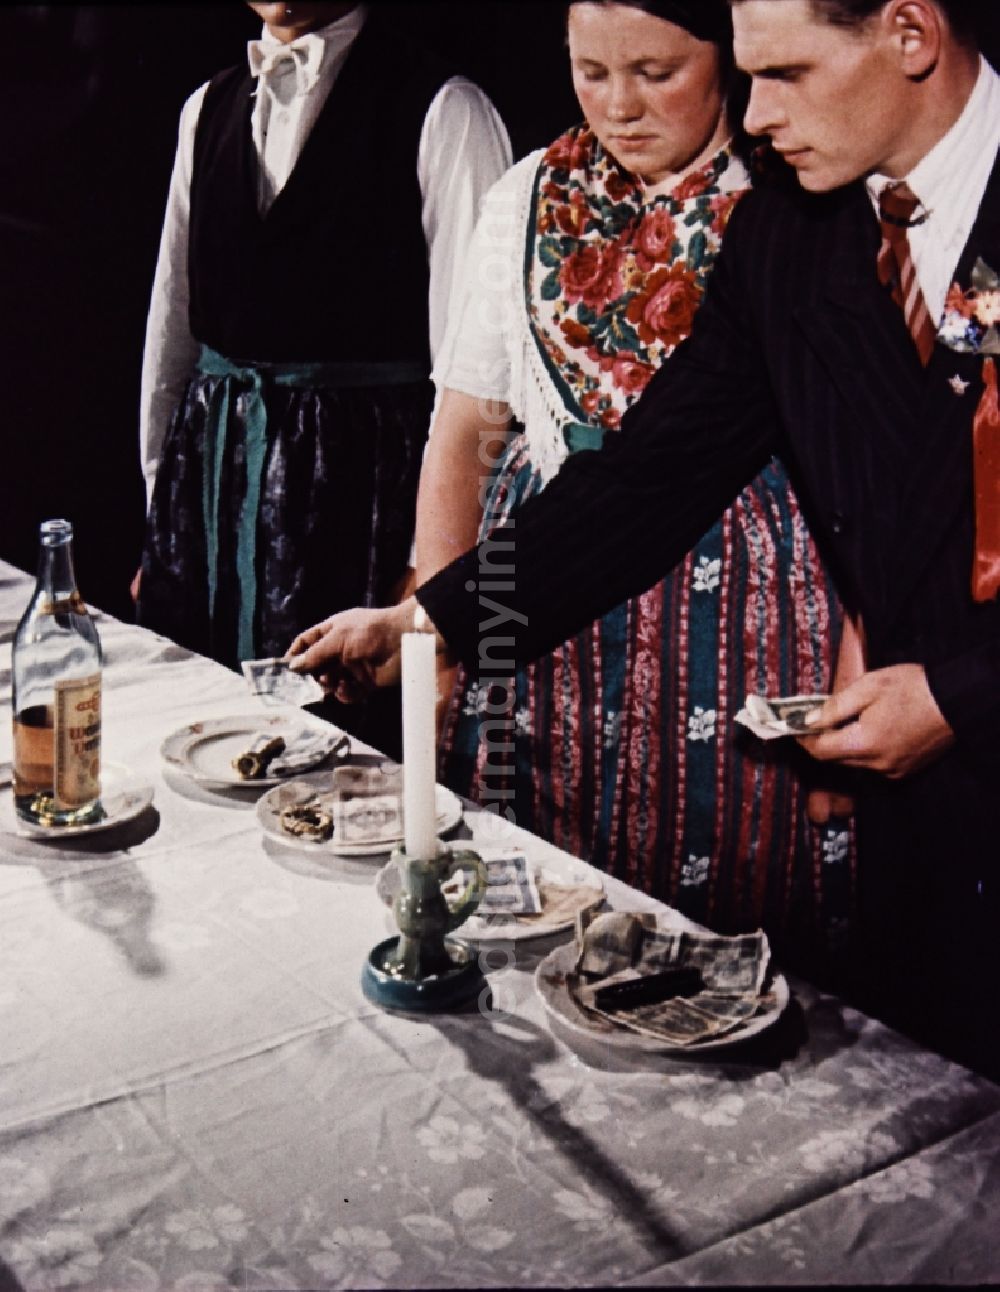 GDR picture archive: Milkel - Wedding sorbian inhabitants in Milkel in the state Saxony on the territory of the former GDR, German Democratic Republic